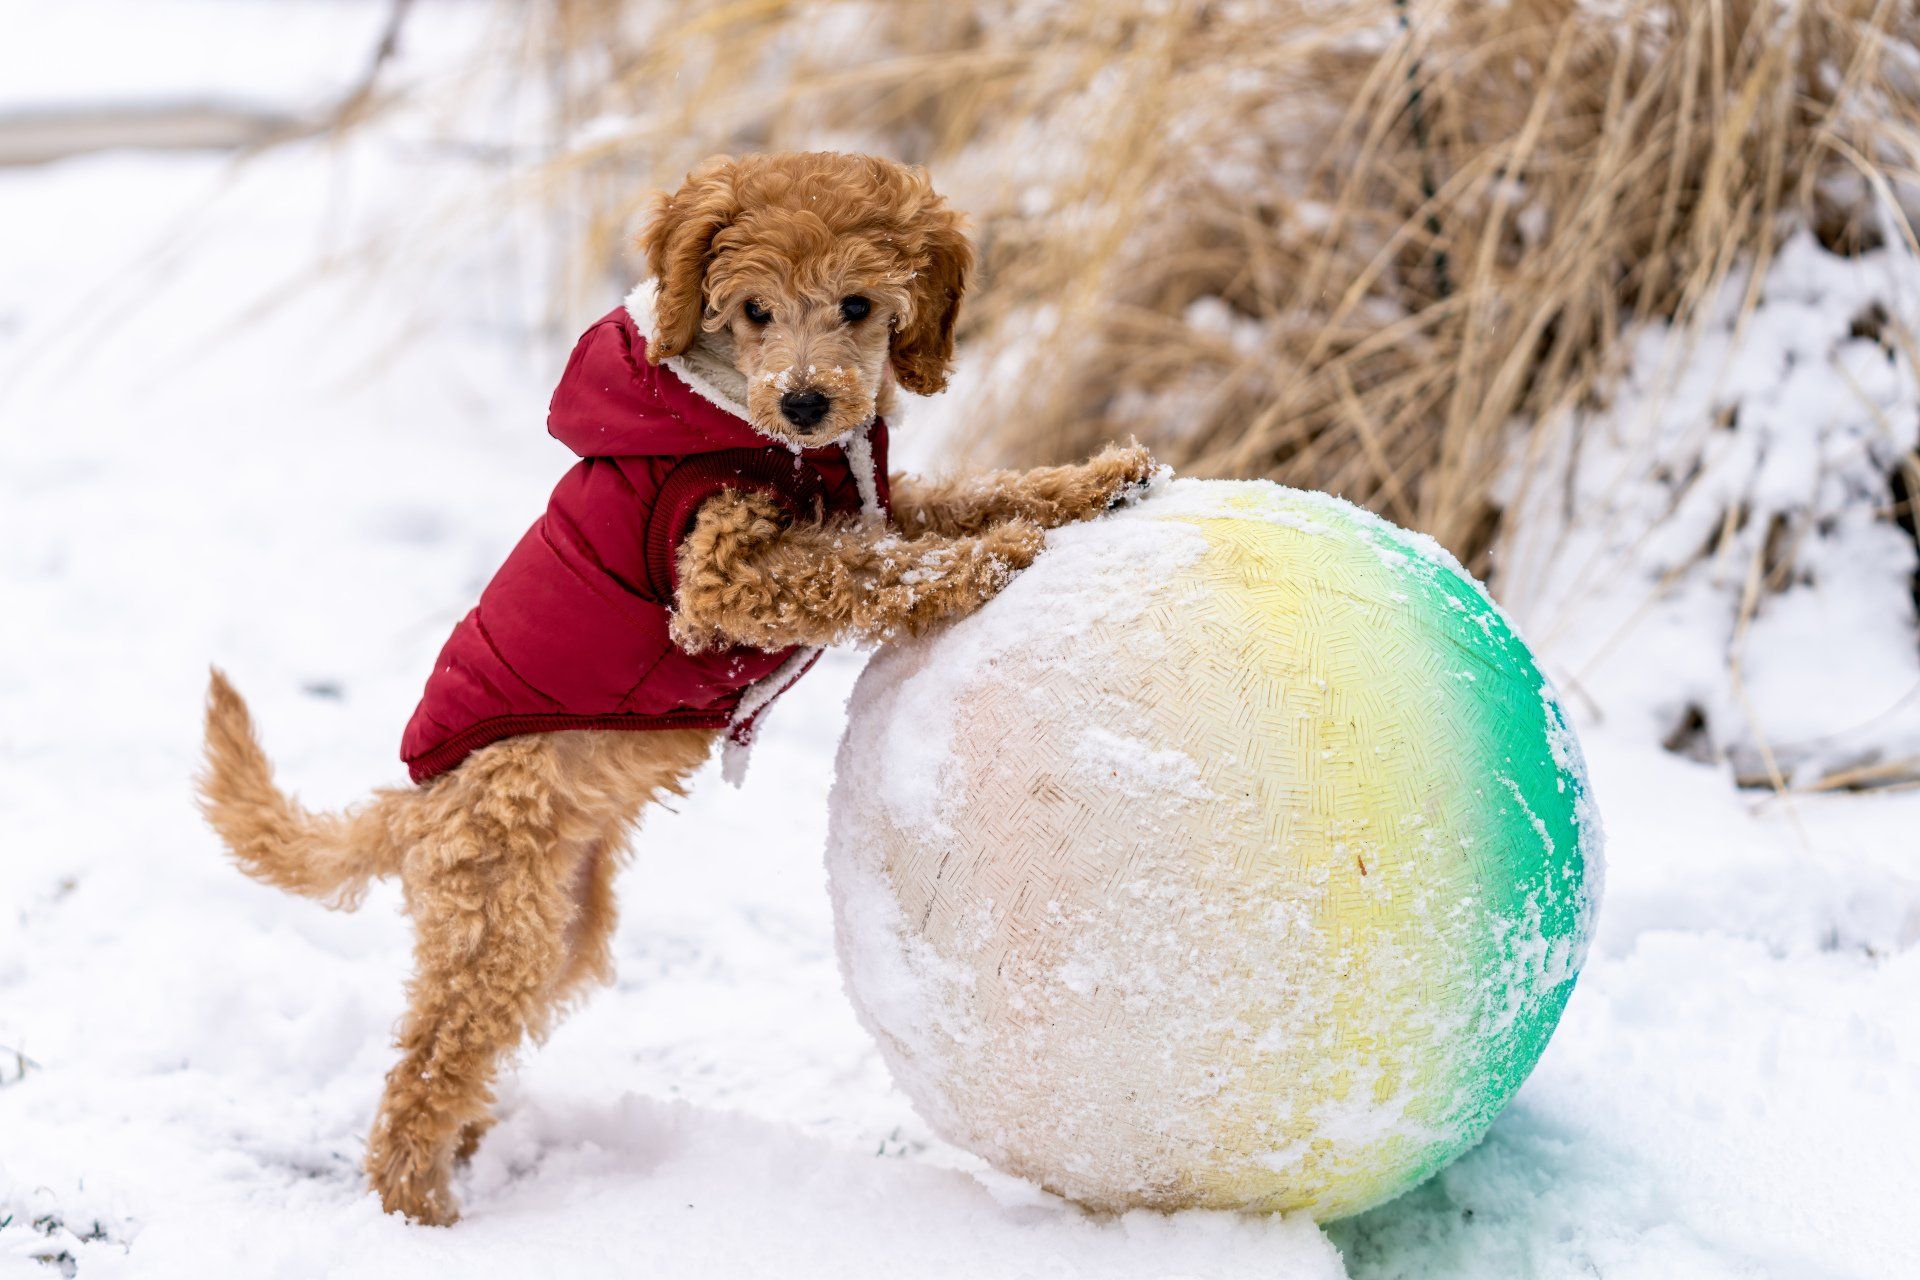 Golden doodle puppy in a winter coat playing with a ball in the snow